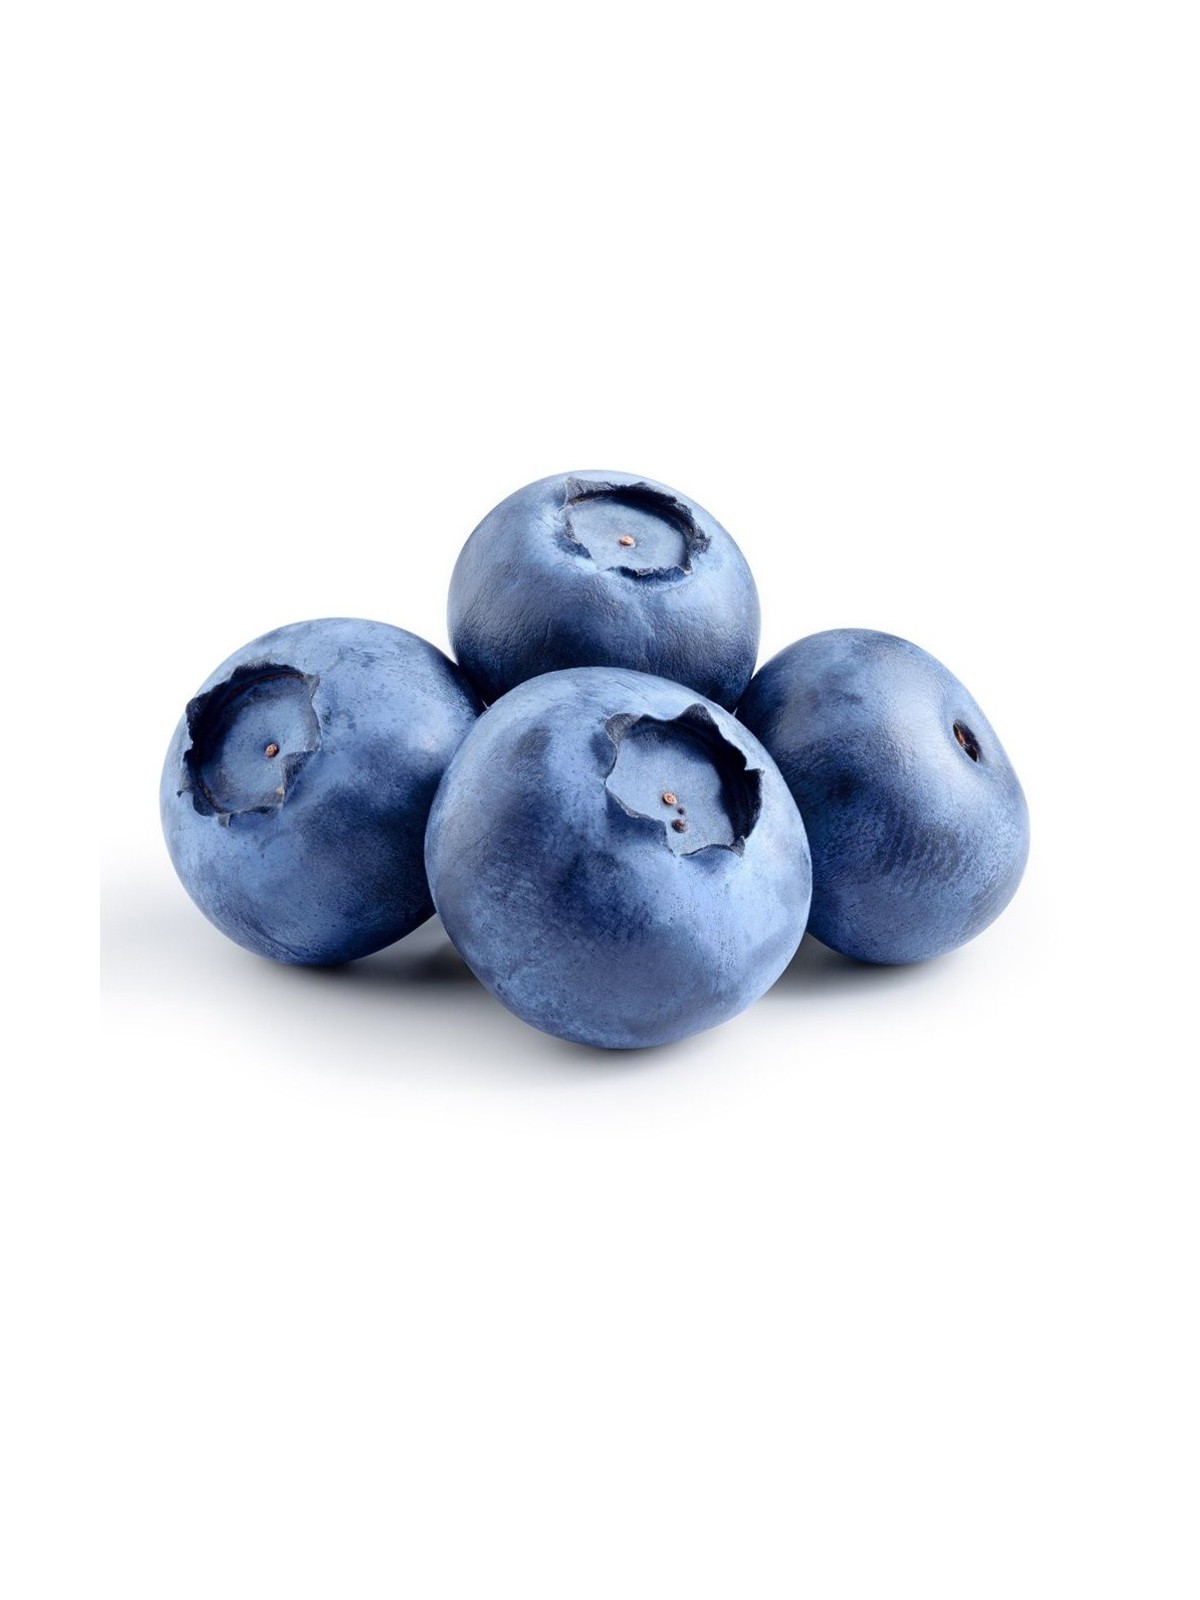 Flavouring 250ml  - BLUEBERRY